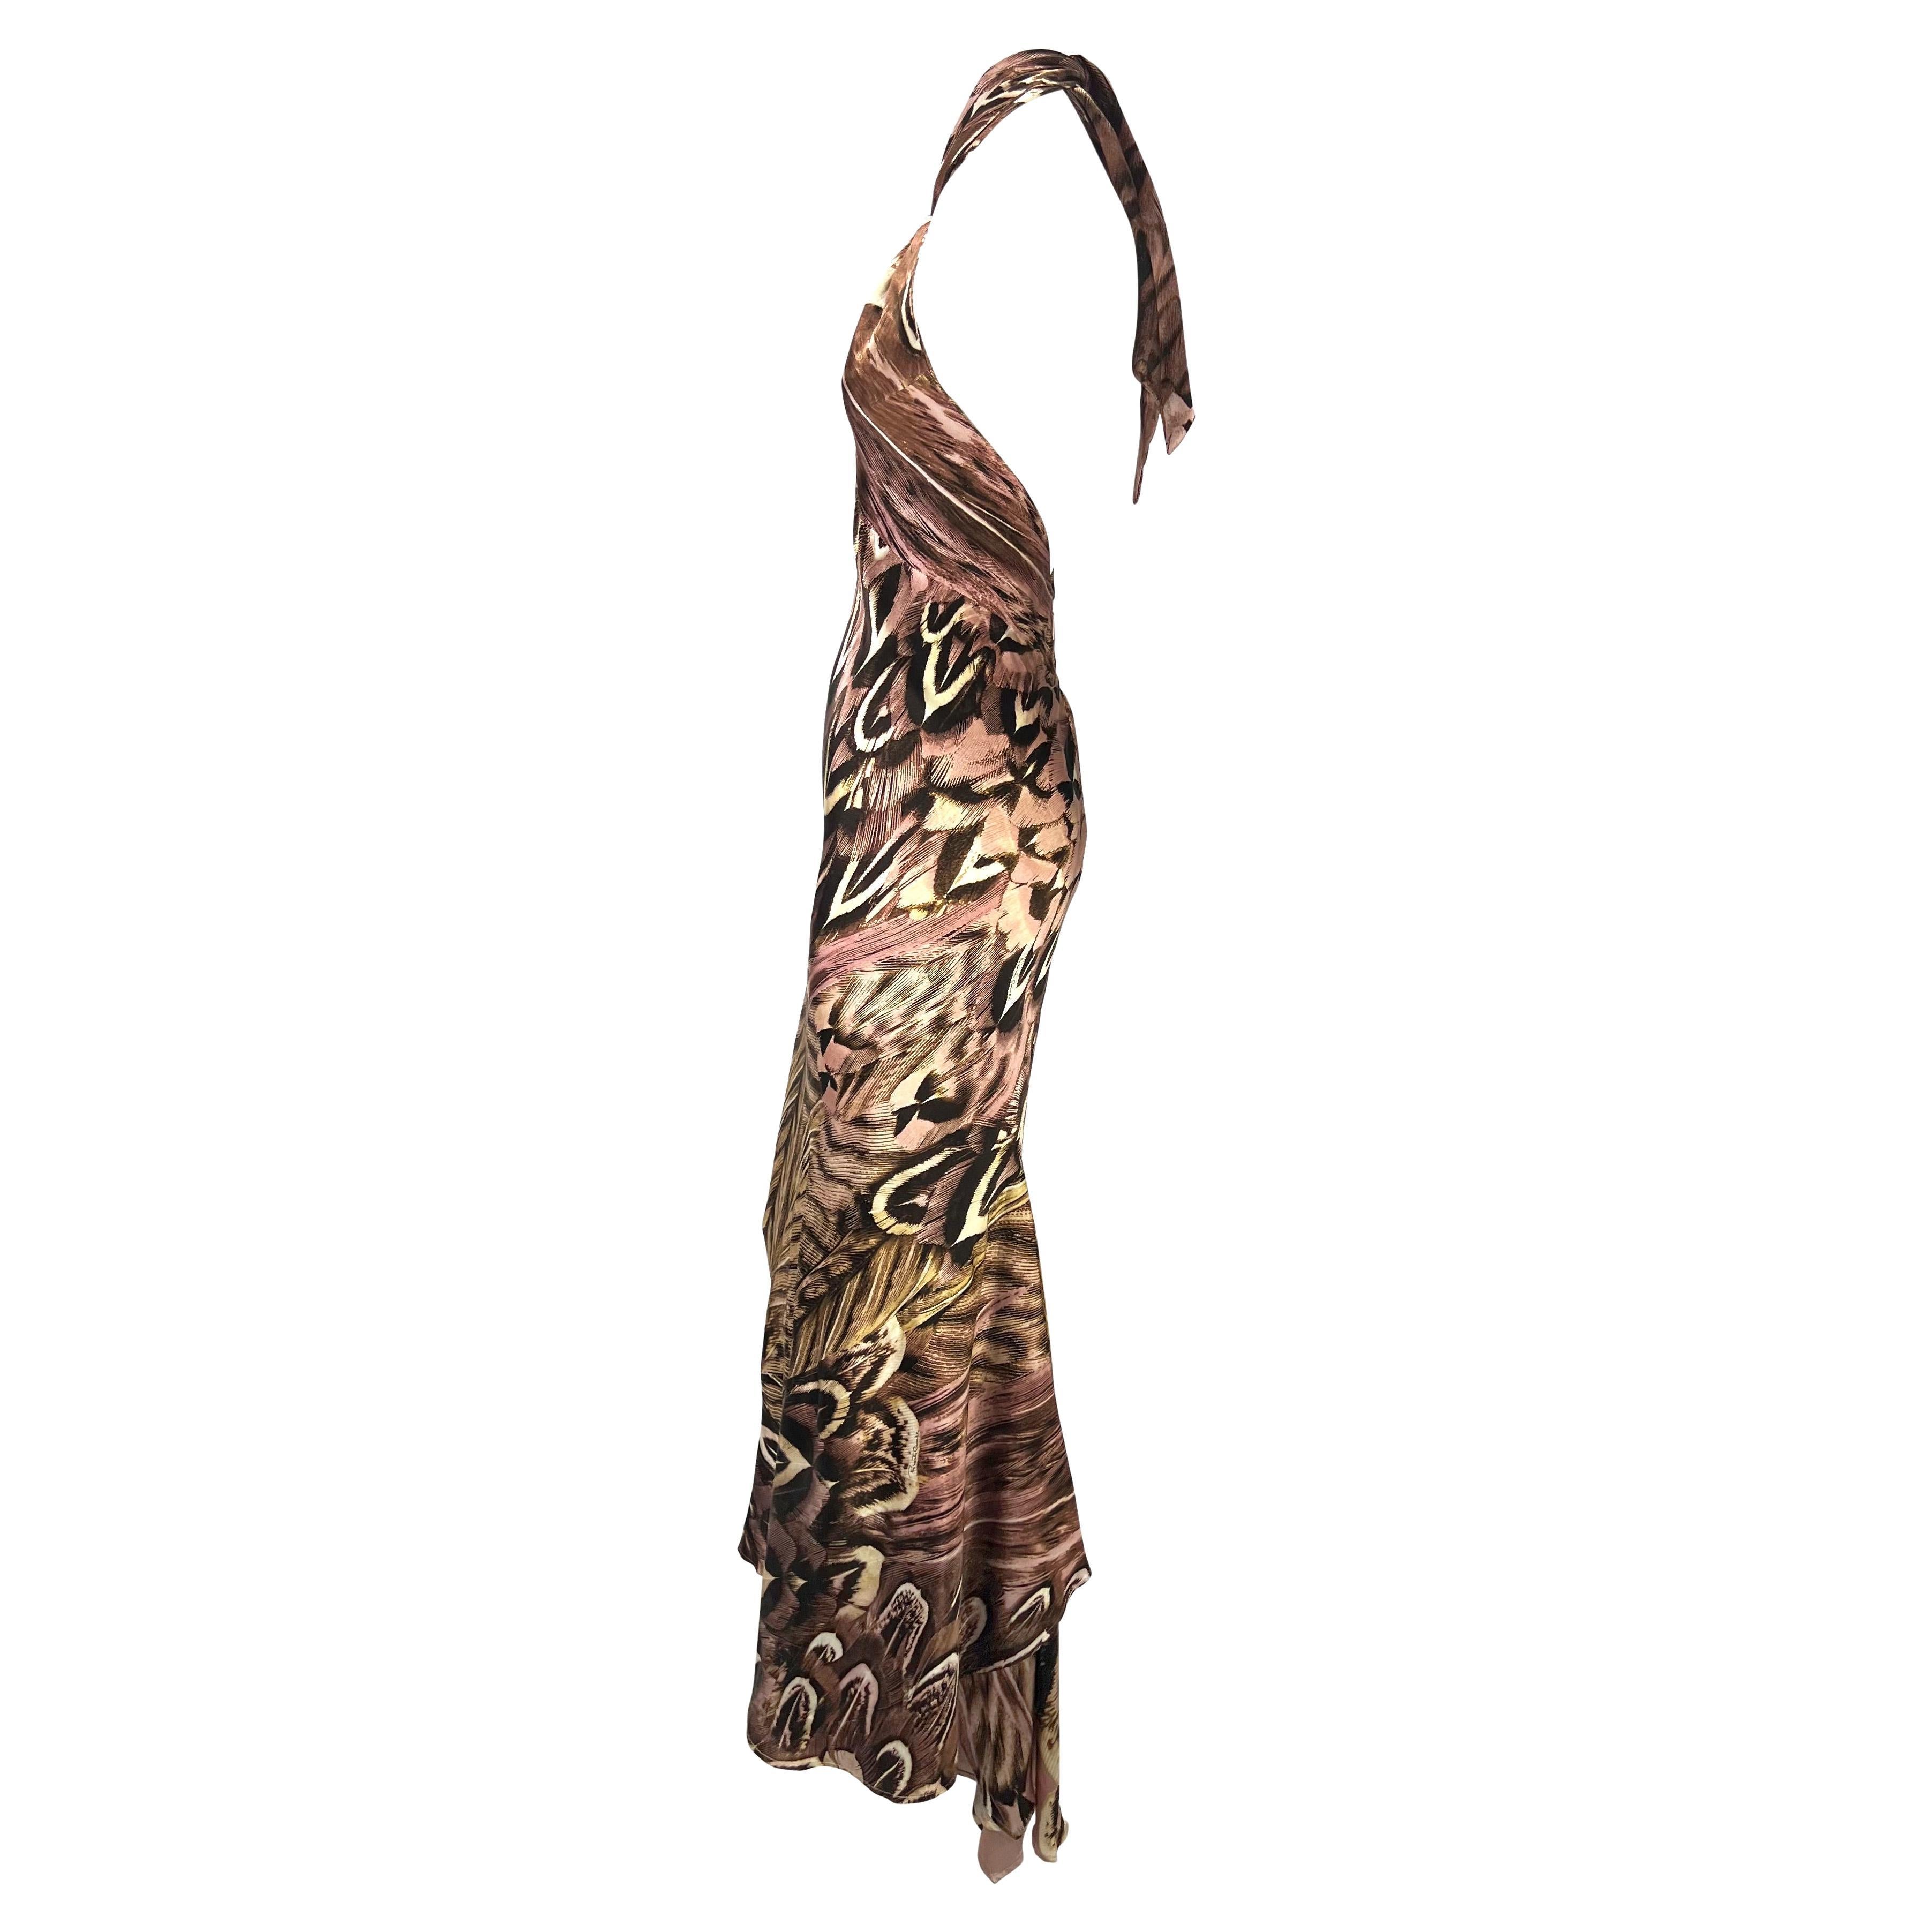 Women's S/S 2005 Roberto Cavalli Silk Feather Print Halter Top Backless Gown For Sale